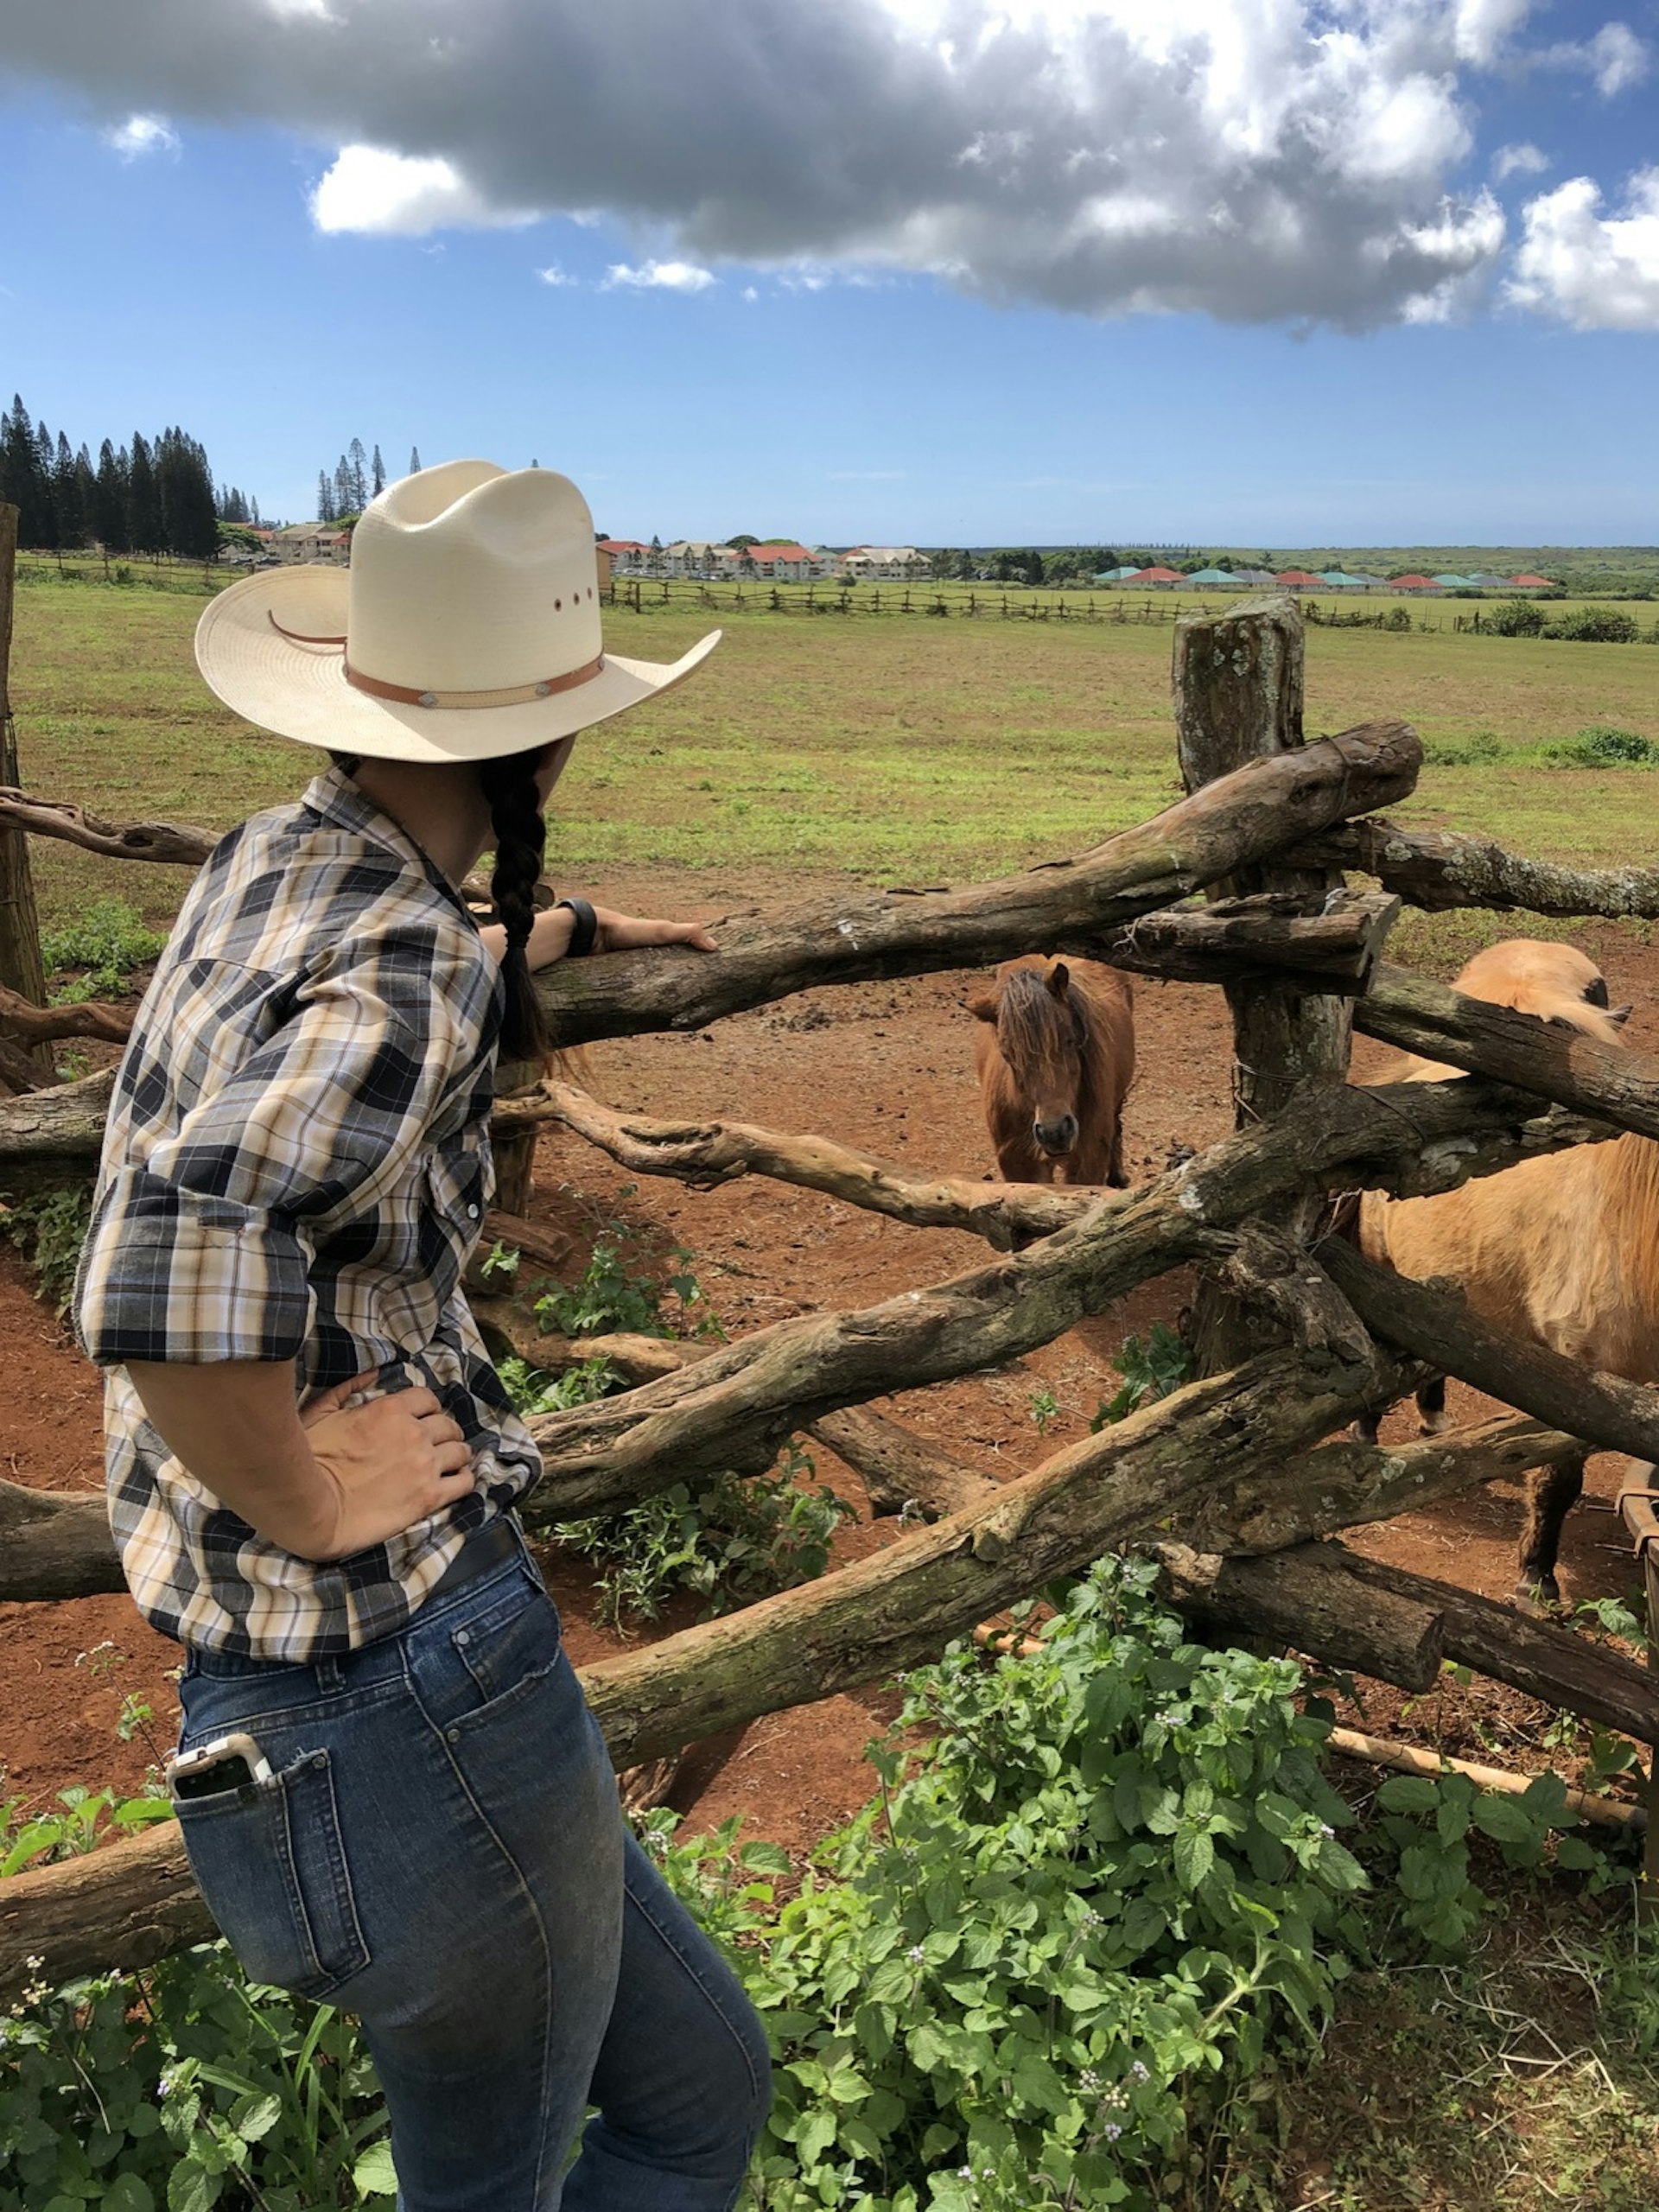 A woman with braided hair, a cowboy hat, jeans and a plaid shirt leans against a wooden fence and looks out at a flat expanse of land